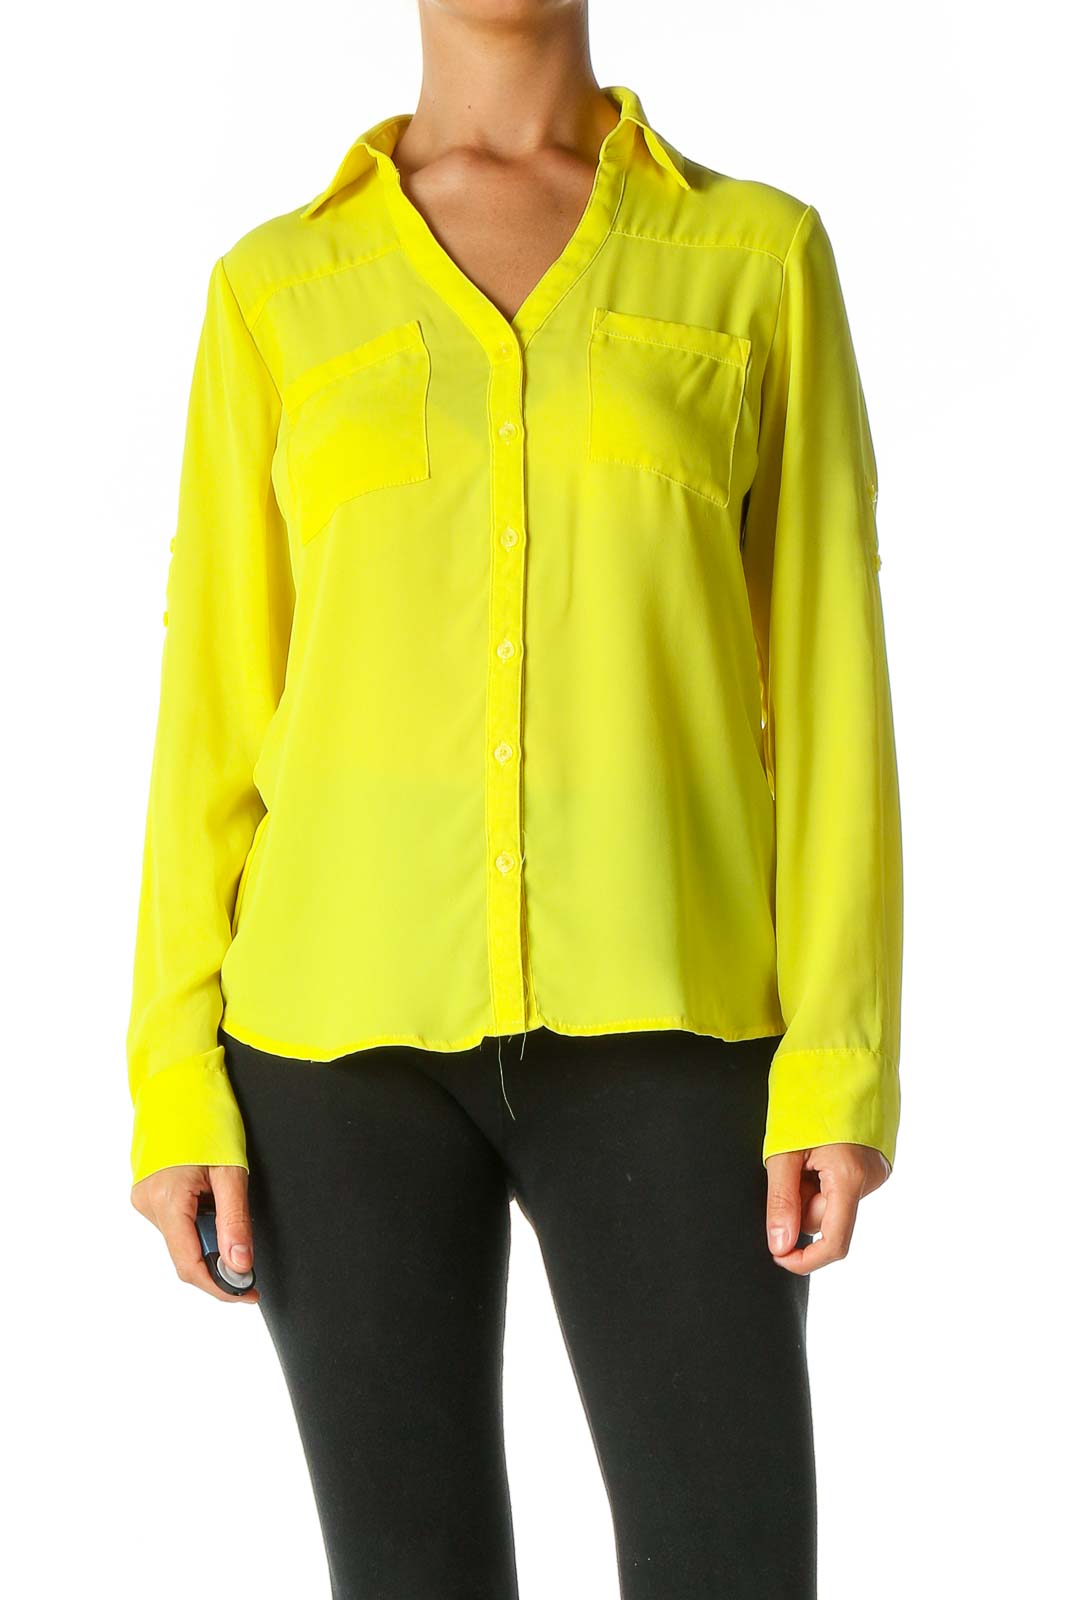 Yellow Solid Retro Blouse Front